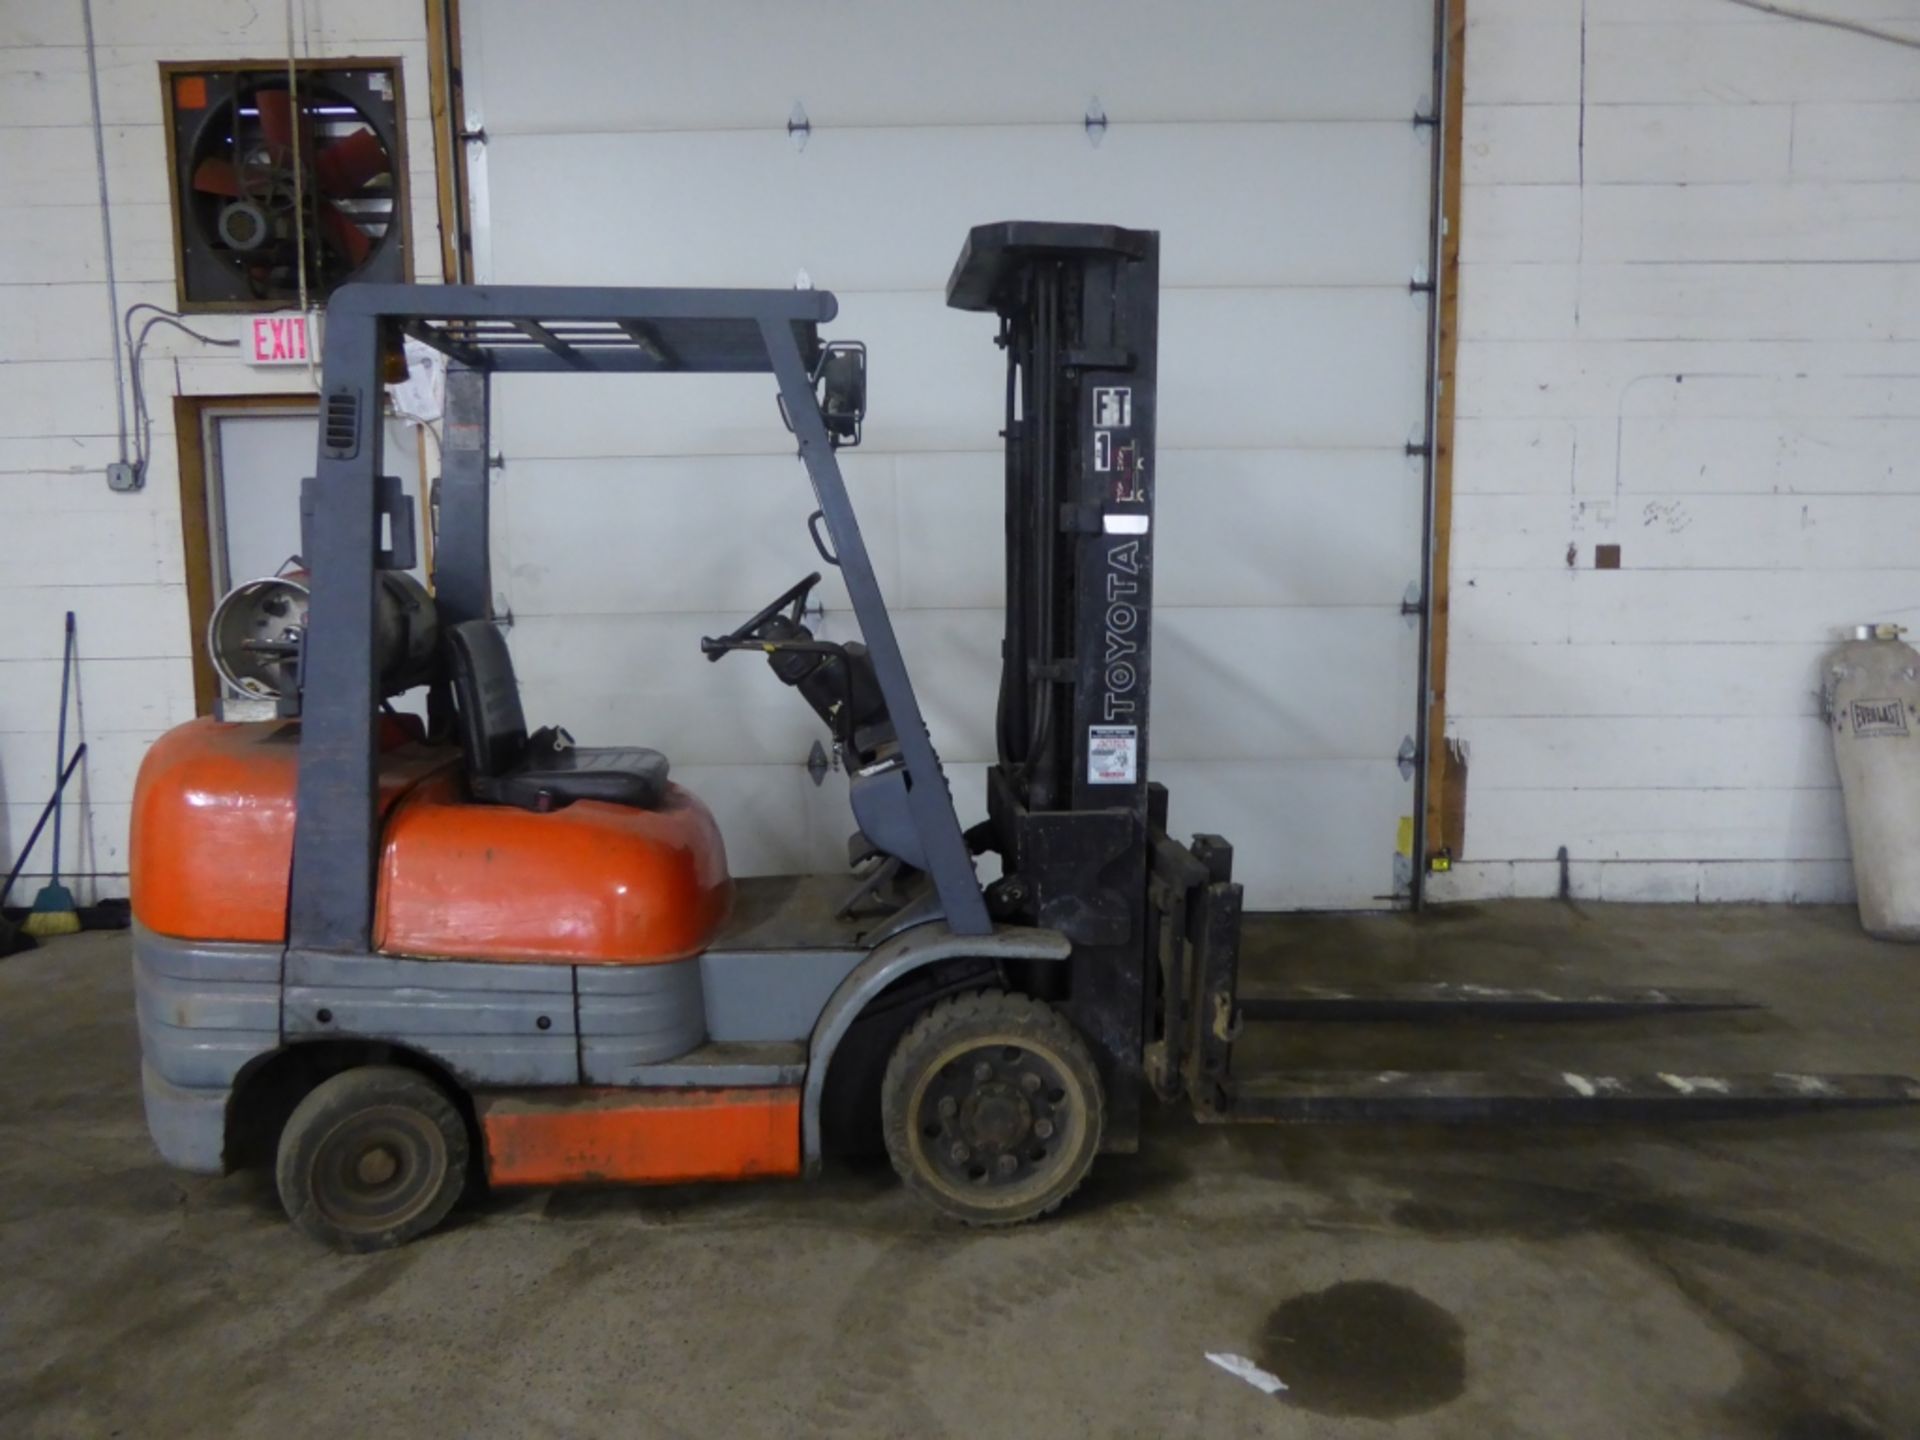 Toyota Forklift We are pleased to bring to you this running Toyota Forklift. This forklift has 21,